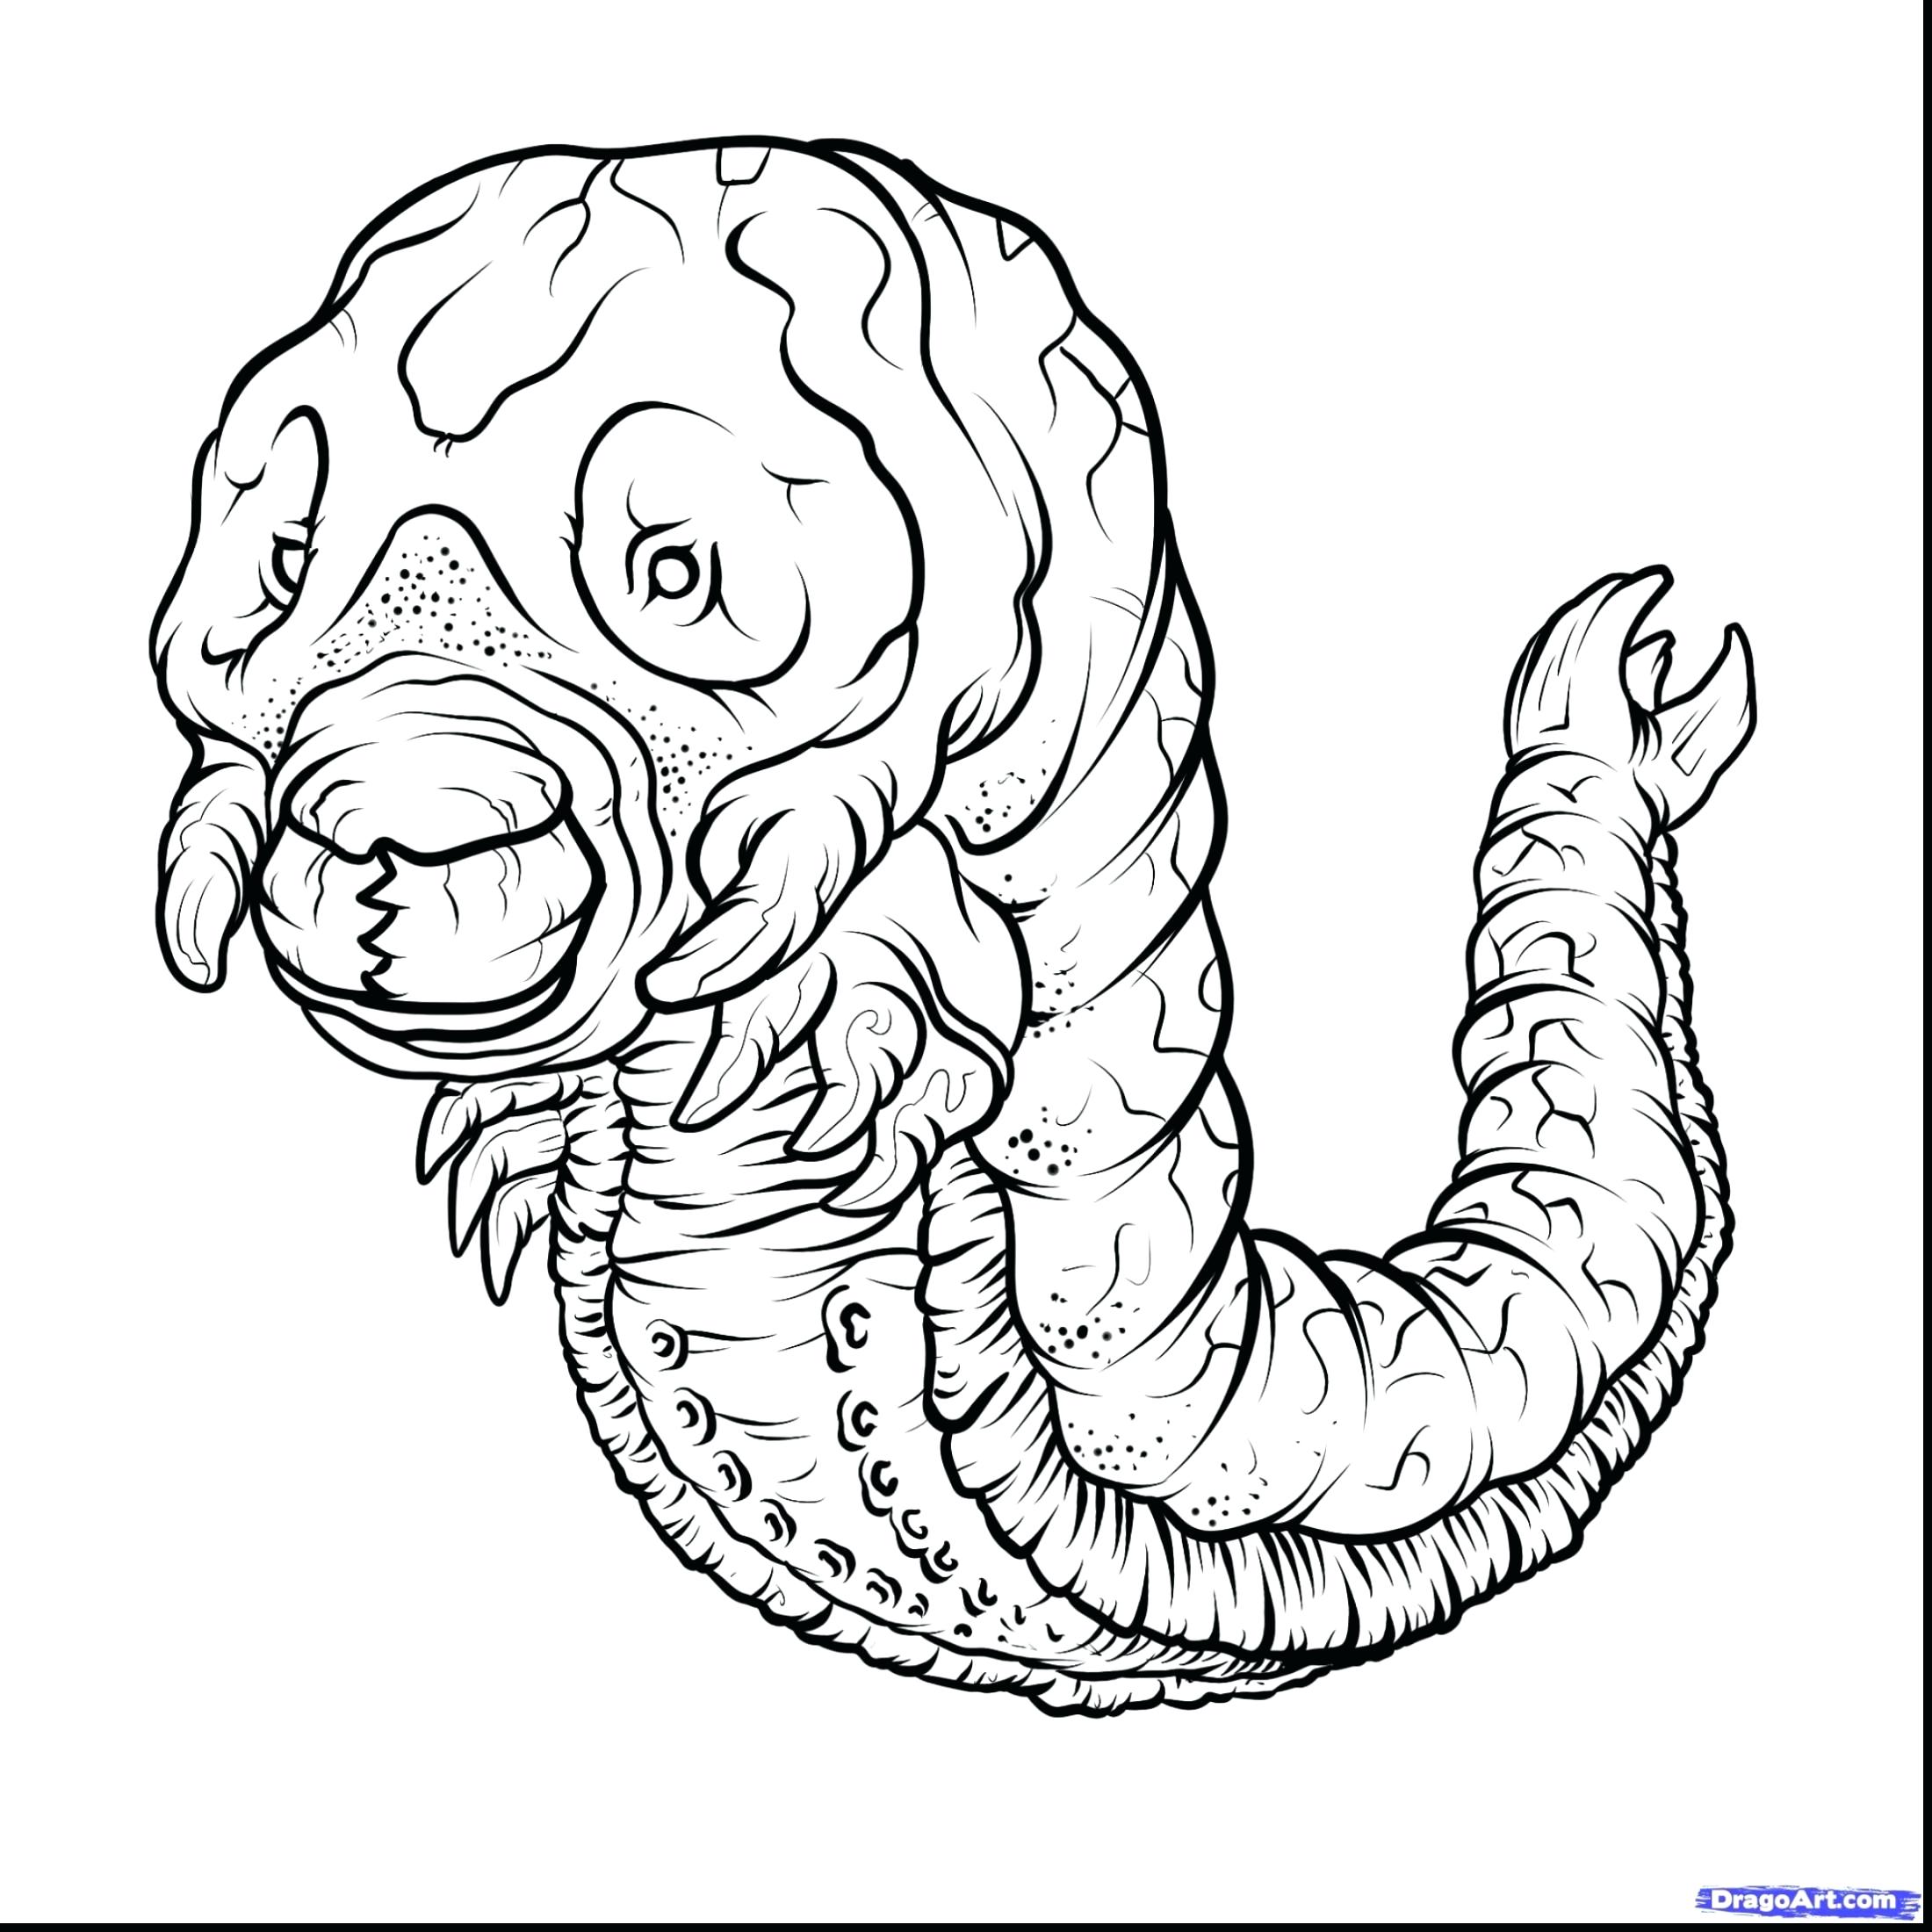 The best free Godzilla coloring page images. Download from ...